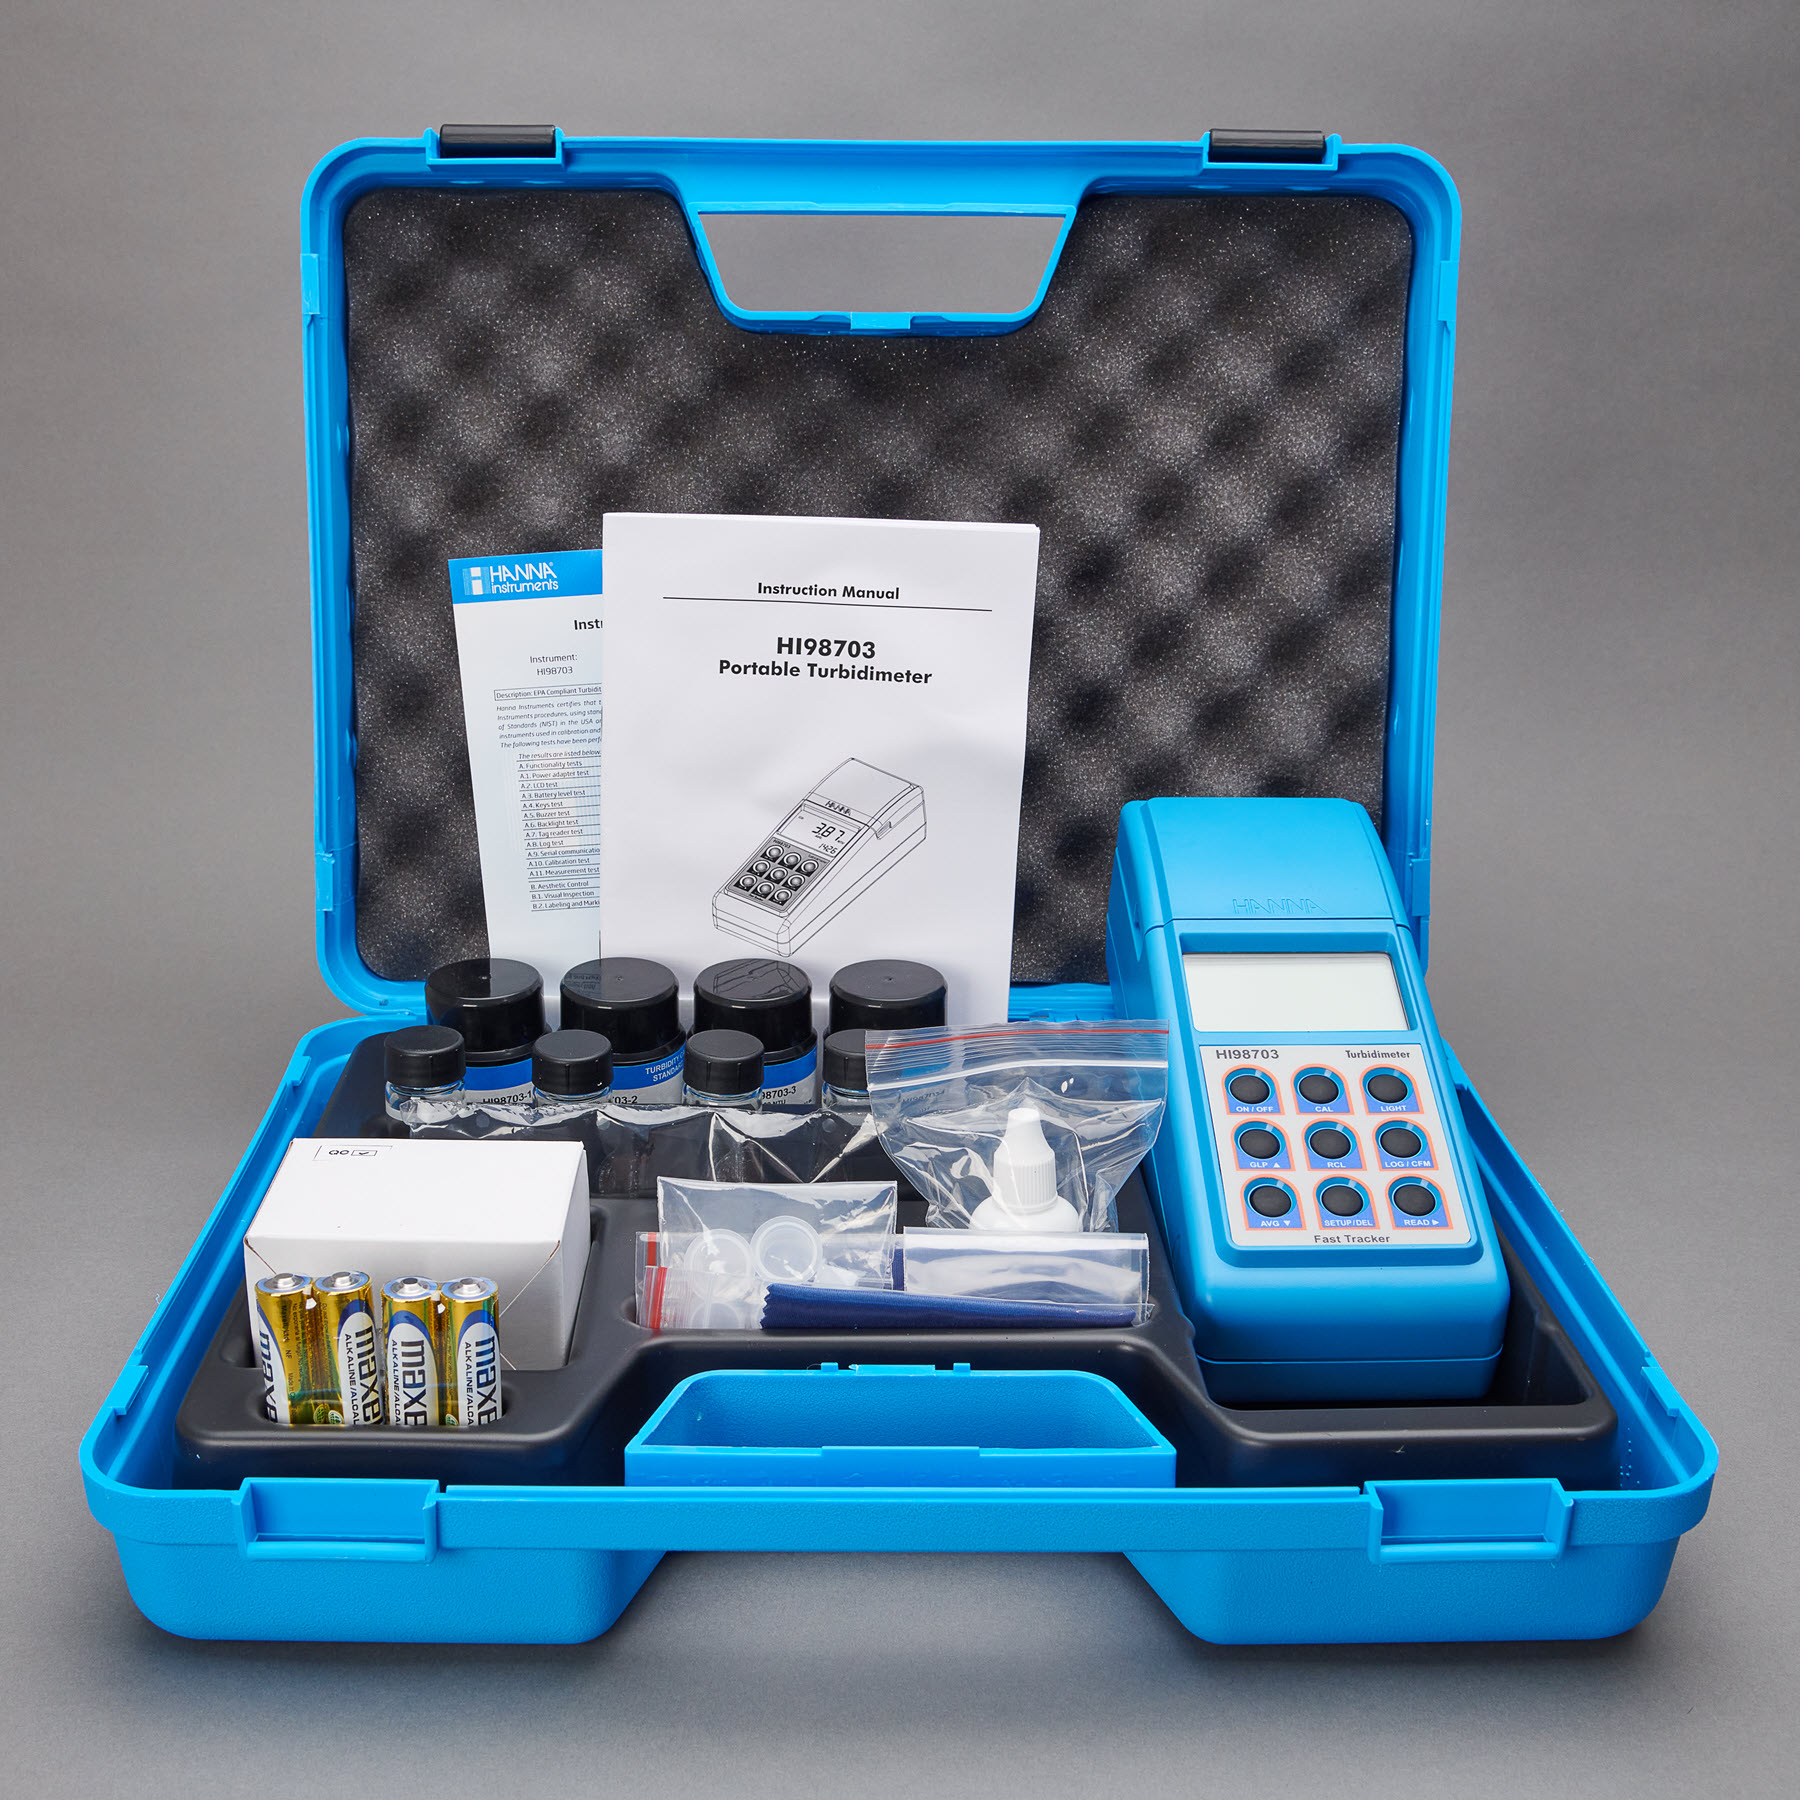 Tests and supplies included in Aquagenx Turbidity Pack